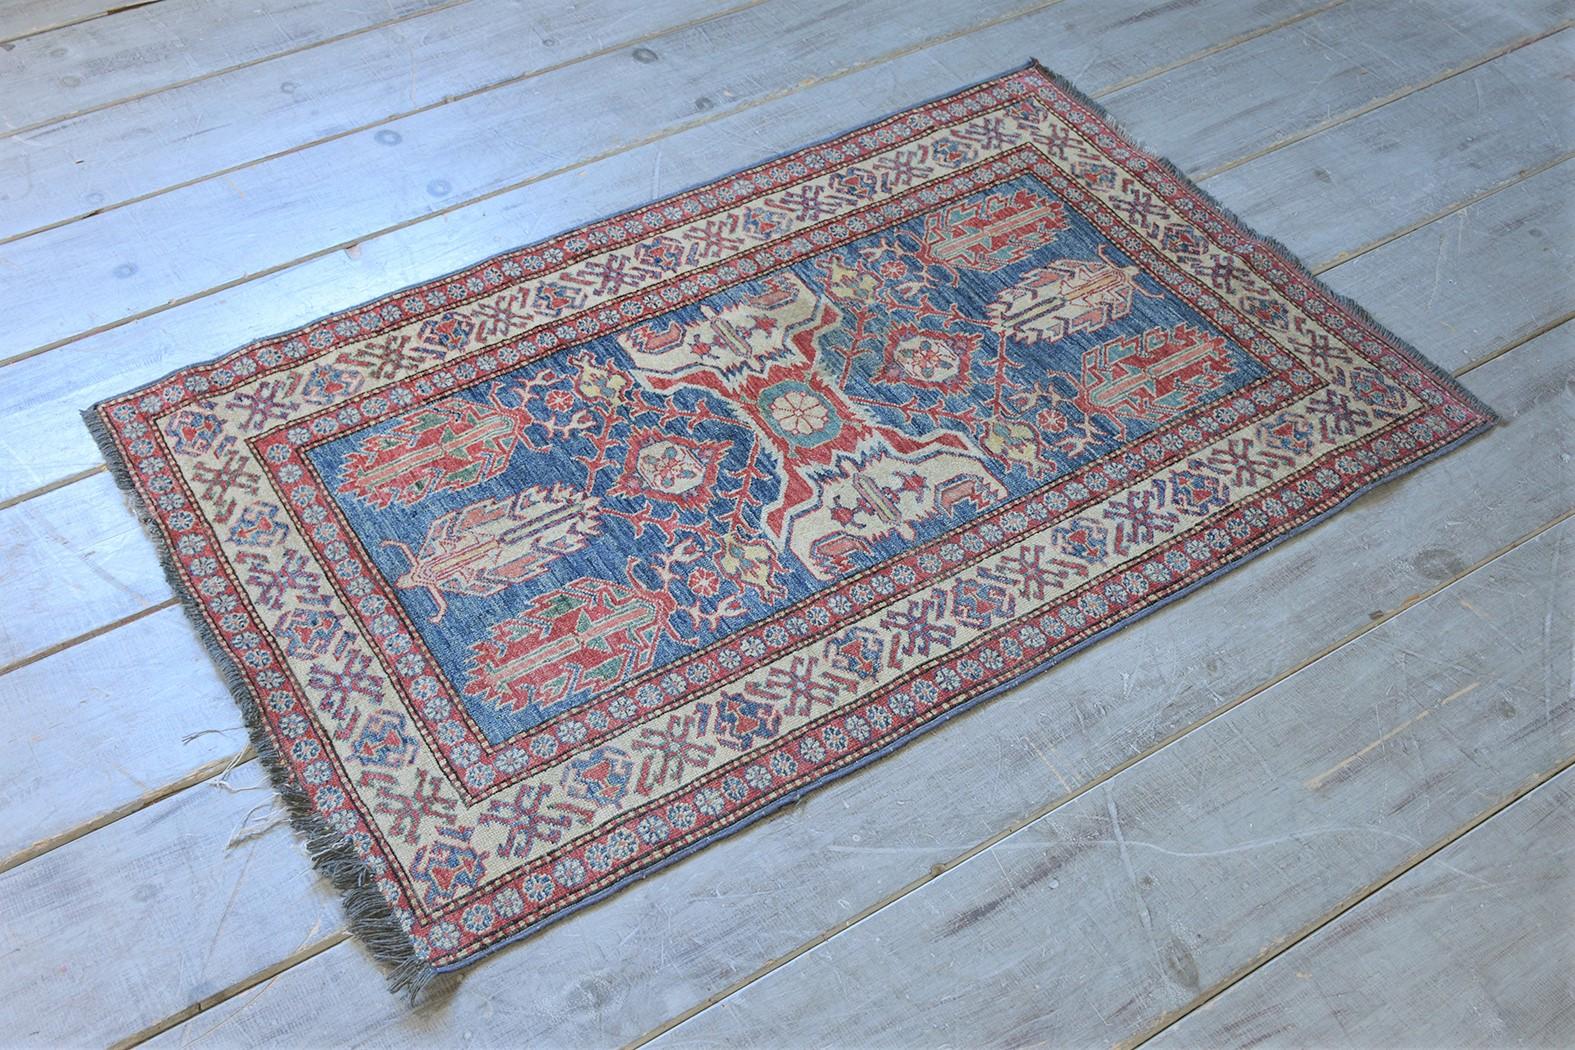 Elevate your living space with our extraordinary semi-antique carpet rug, crafted from wool and in excellent condition. This remarkable vintage rug draws the eye with its intricate asymmetrical design and vivid color palette featuring blue, red, and